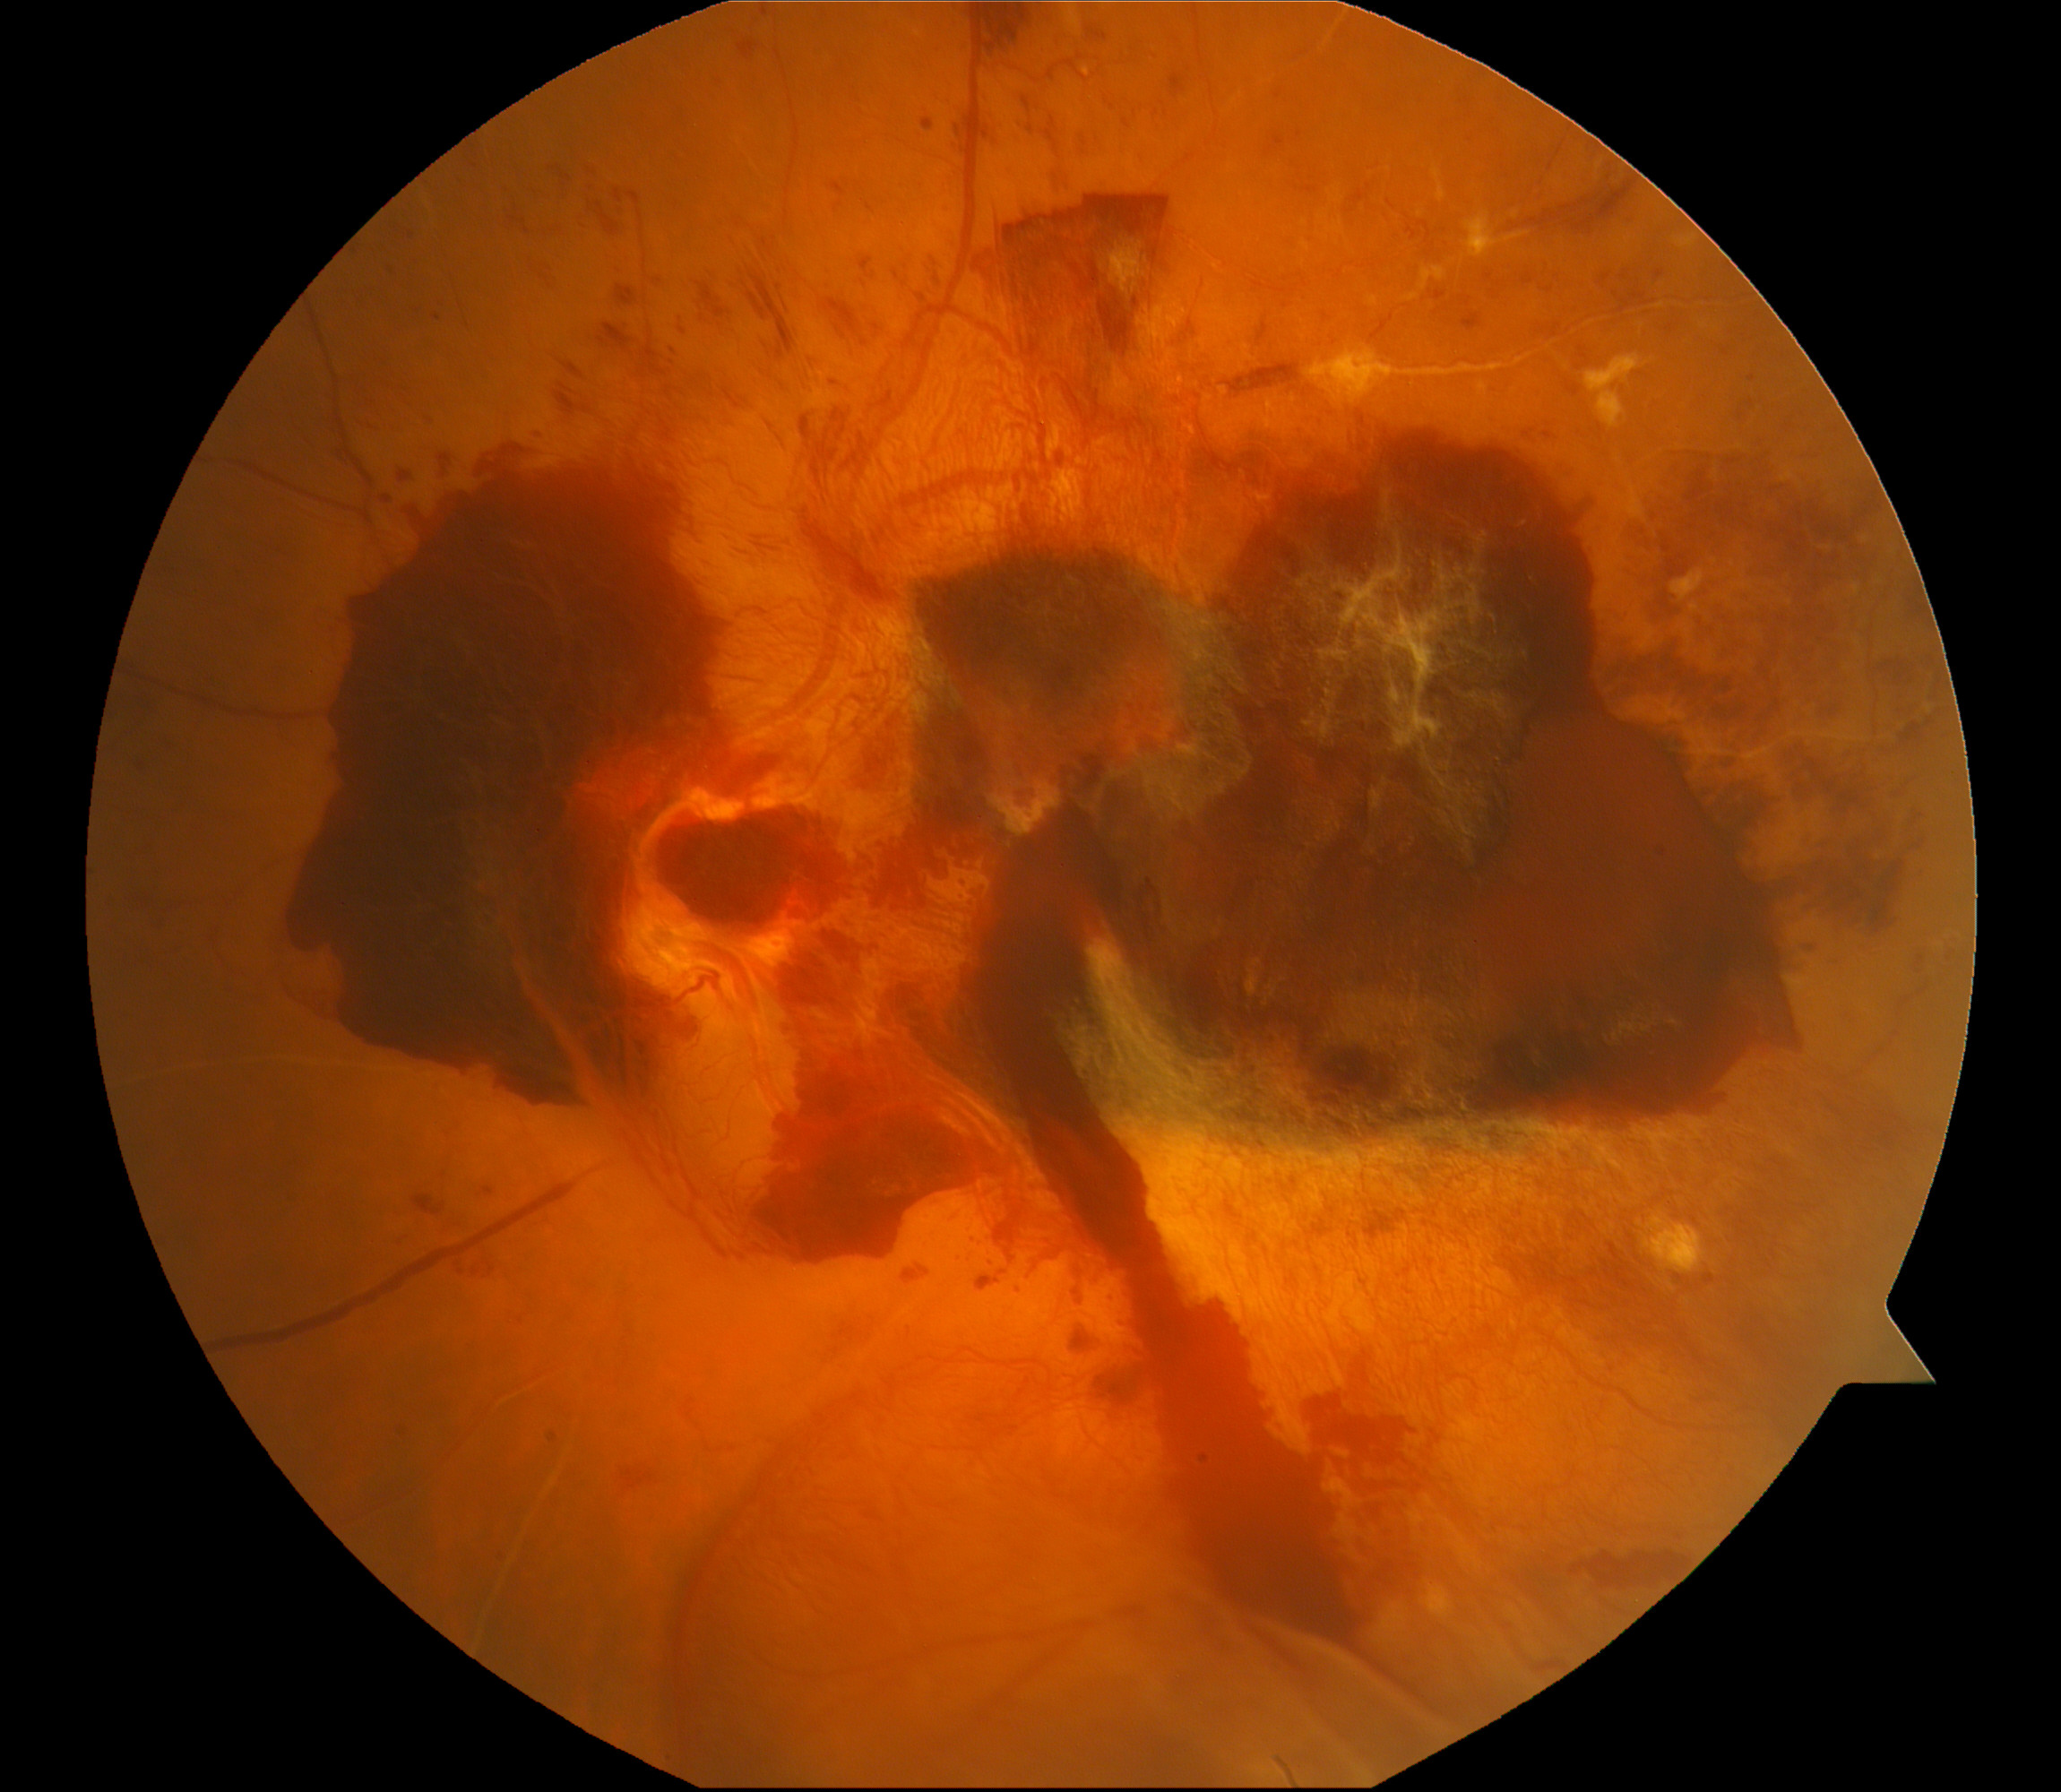 Diabetic retinopathy: Proliferative Vitreoretinopathy (PVR) with overlying hemorrhage. PVR is caused by previous retinal detachments leading to scars that prevent the retina from reattaching appropriately.